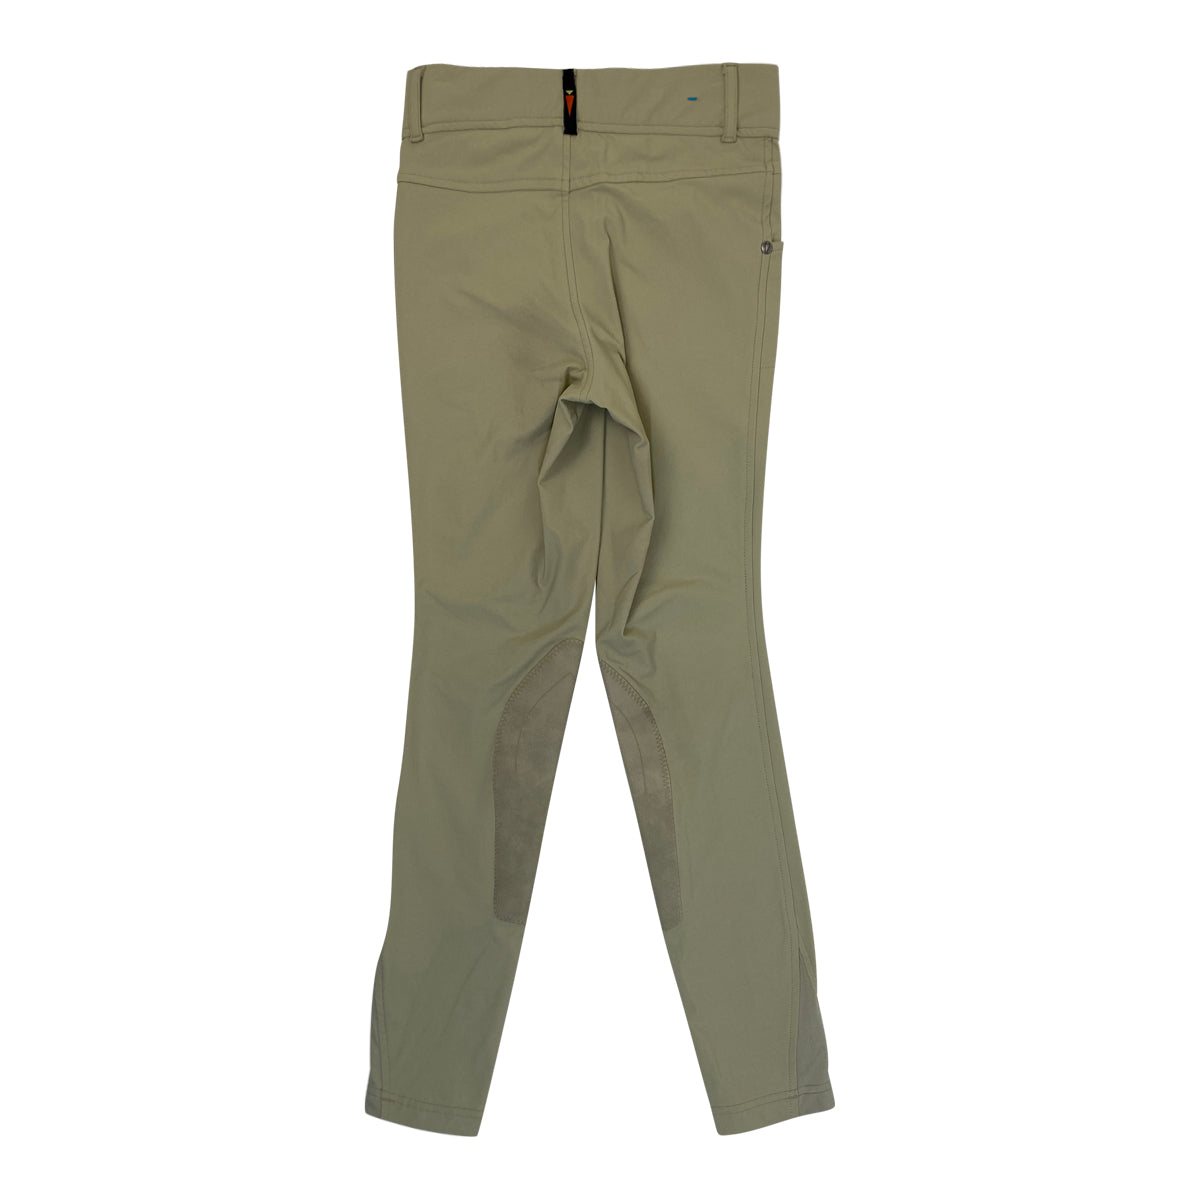 Kerrits 'Crossover II' Knee Patch Breeches in Tan